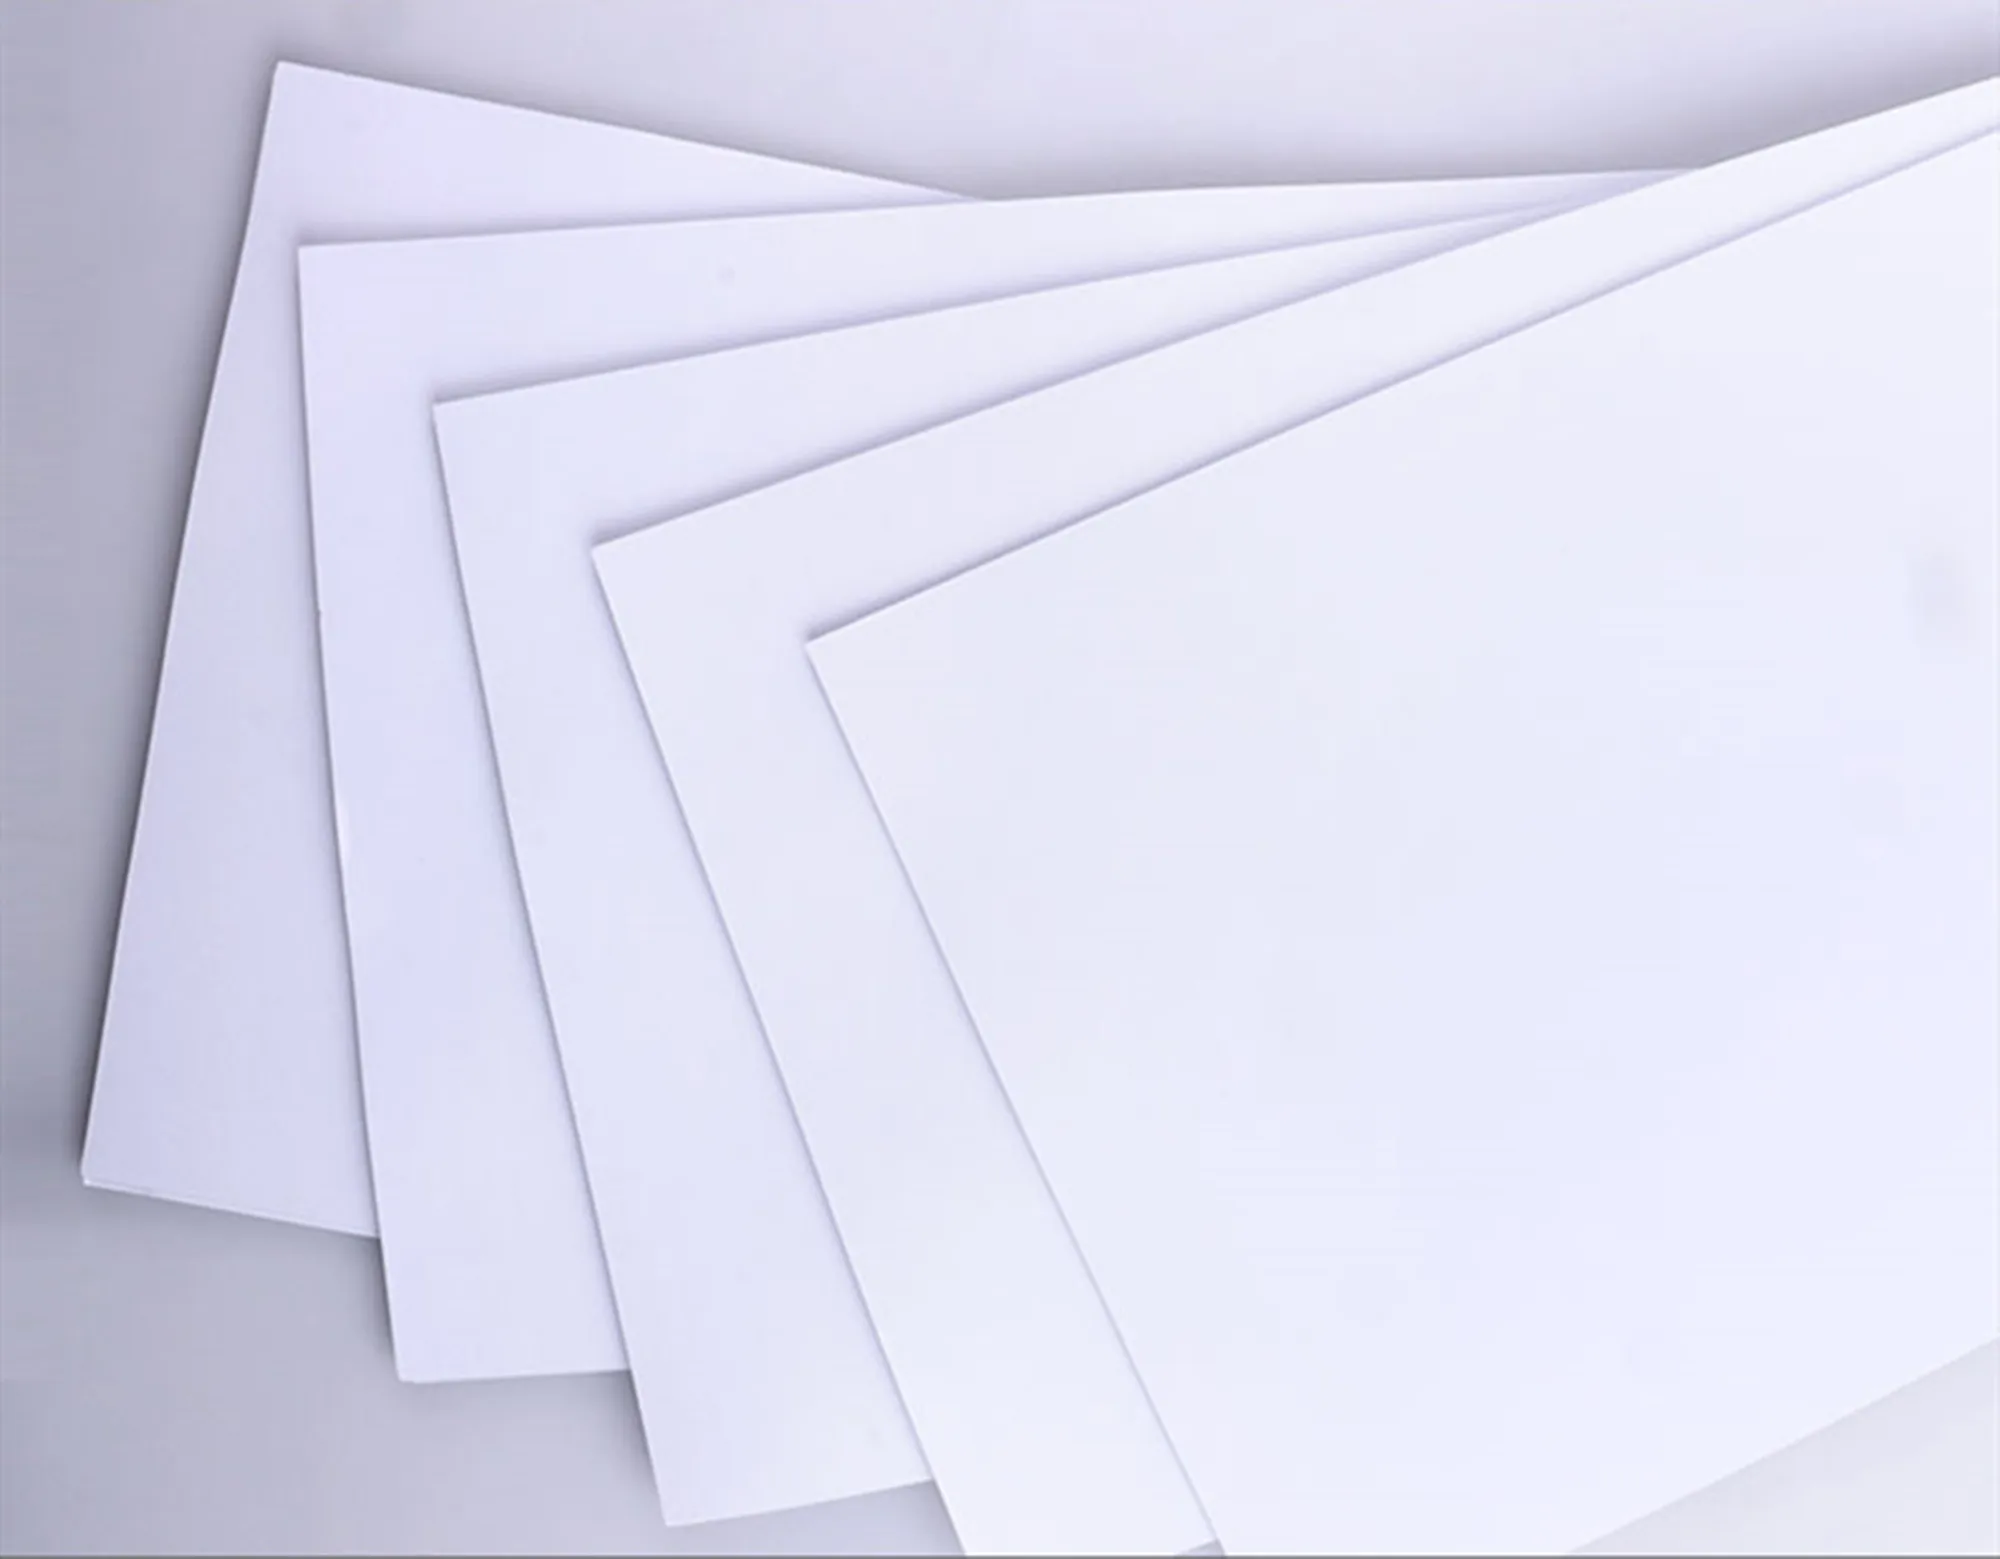 
Professional Office 80gsm Mutual Trust A4 Size Copier Paper 